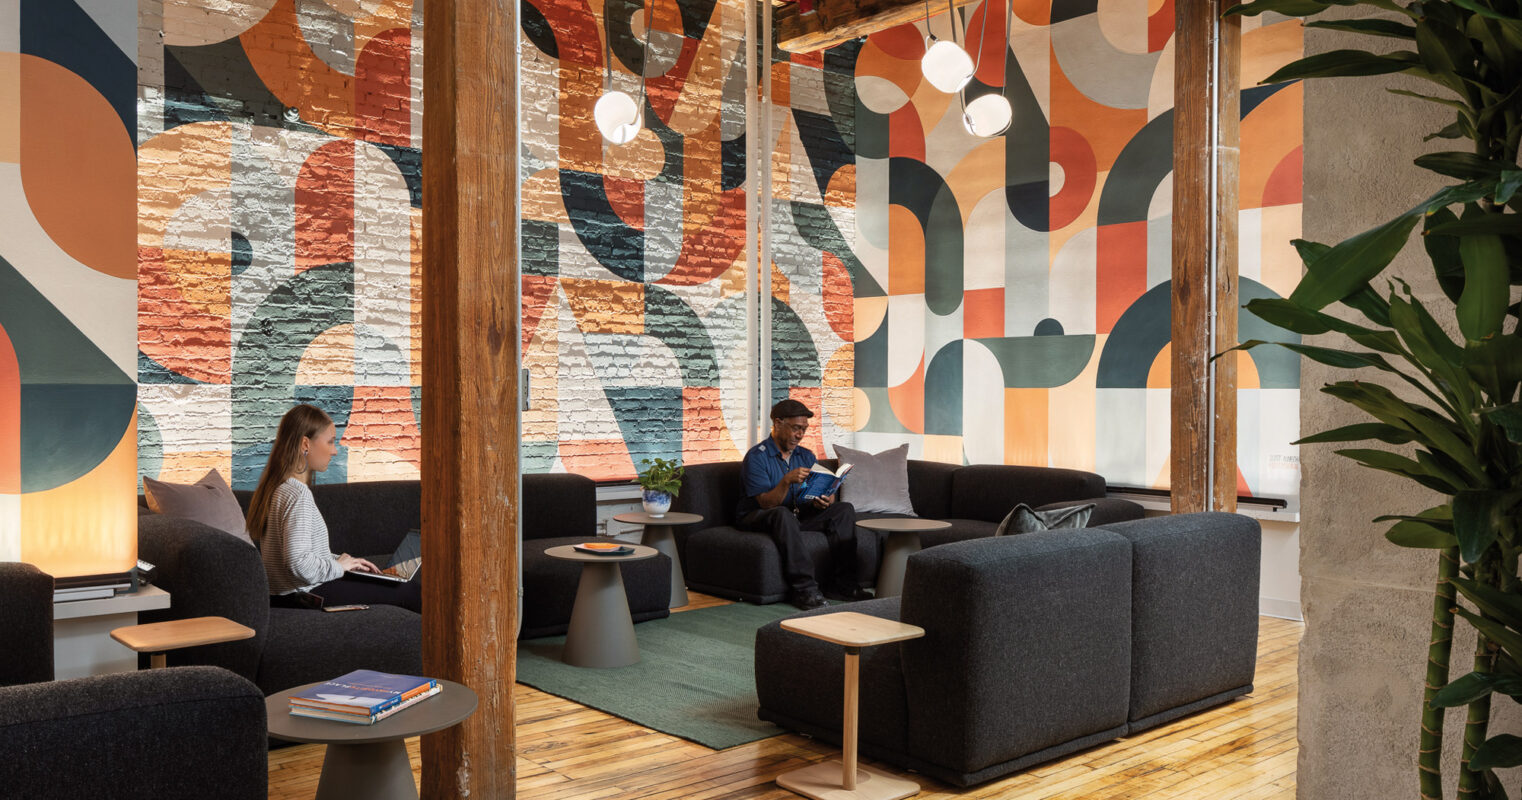 A modern, office environment with a vibrant and colorful painted wall design. The office features high ceilings and contemporary lighting fixtures